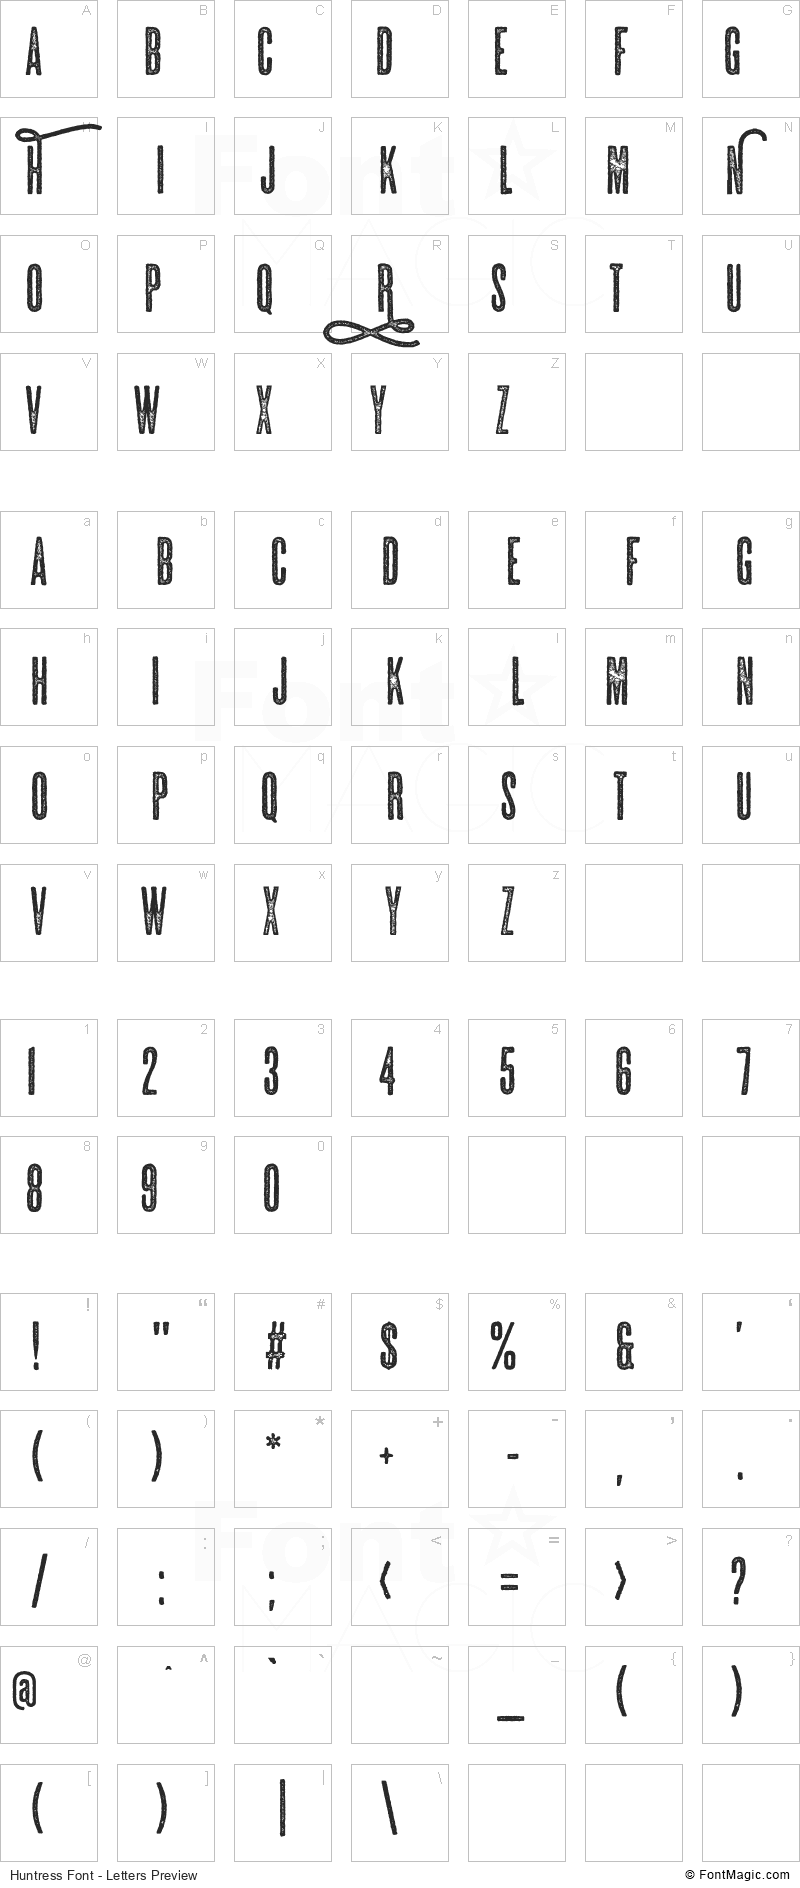 Huntress Font - All Latters Preview Chart